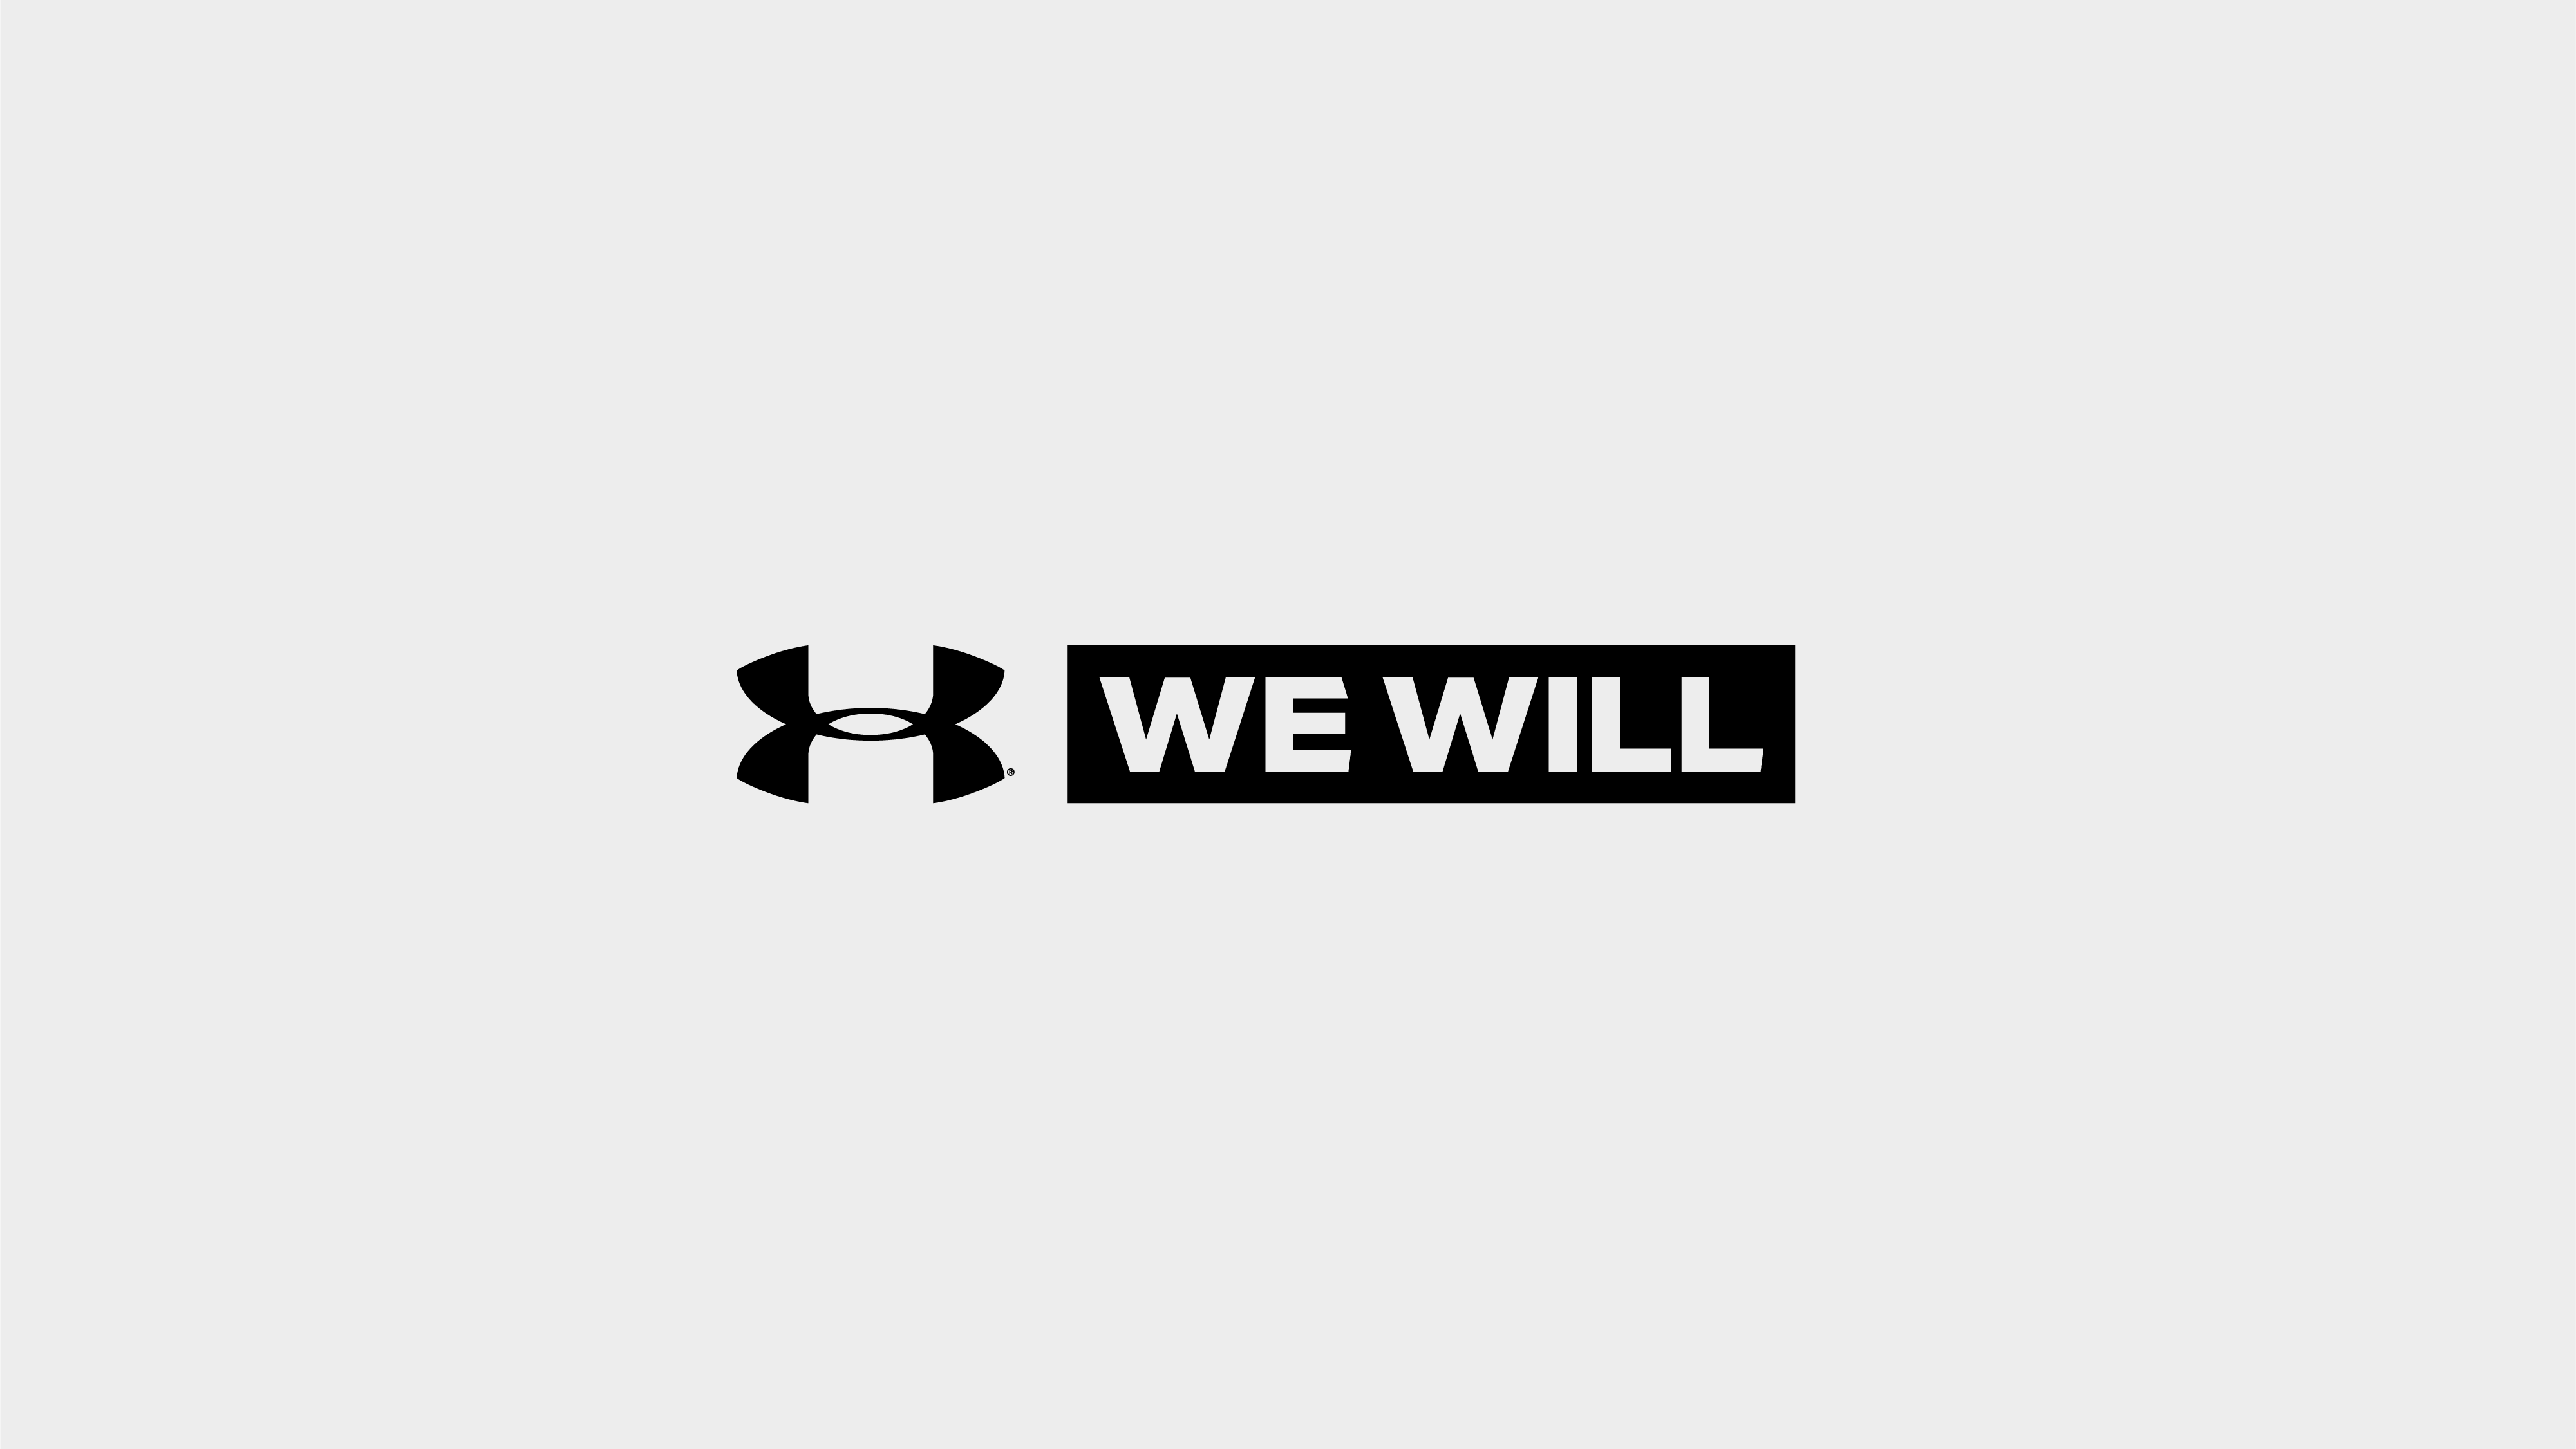 under armour we will